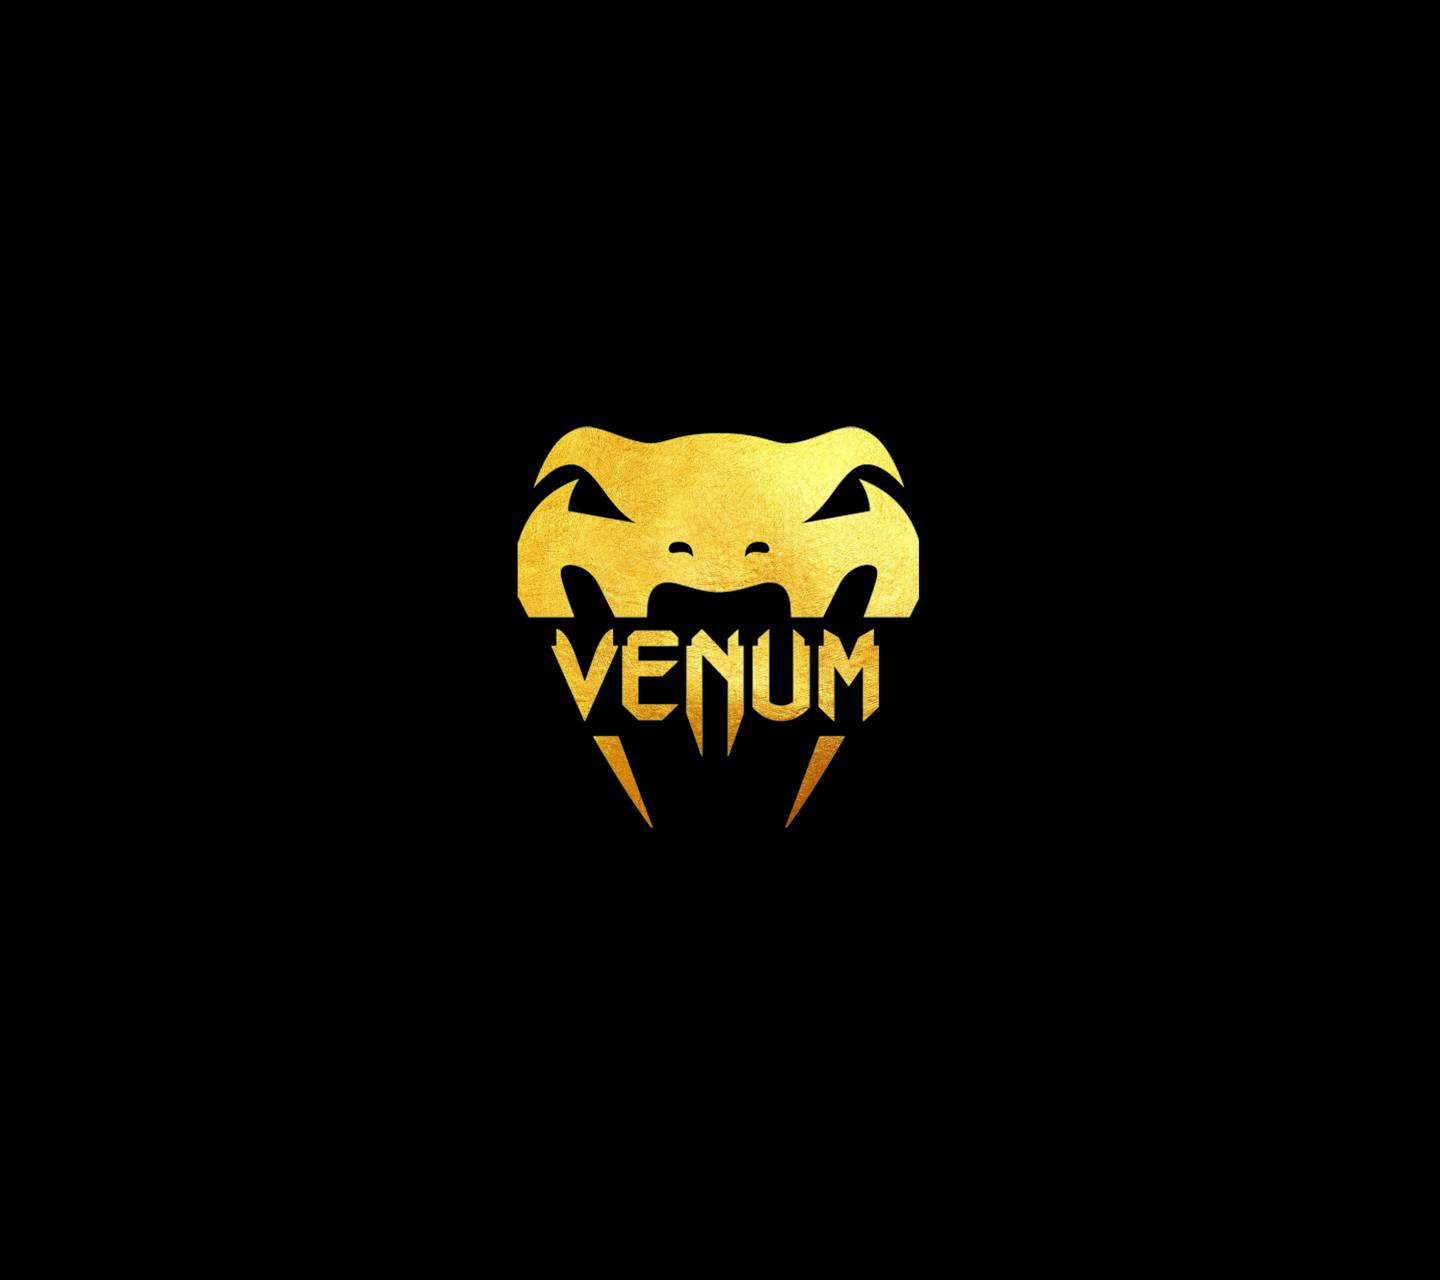 Download free venum wallpaper for your mobile phone